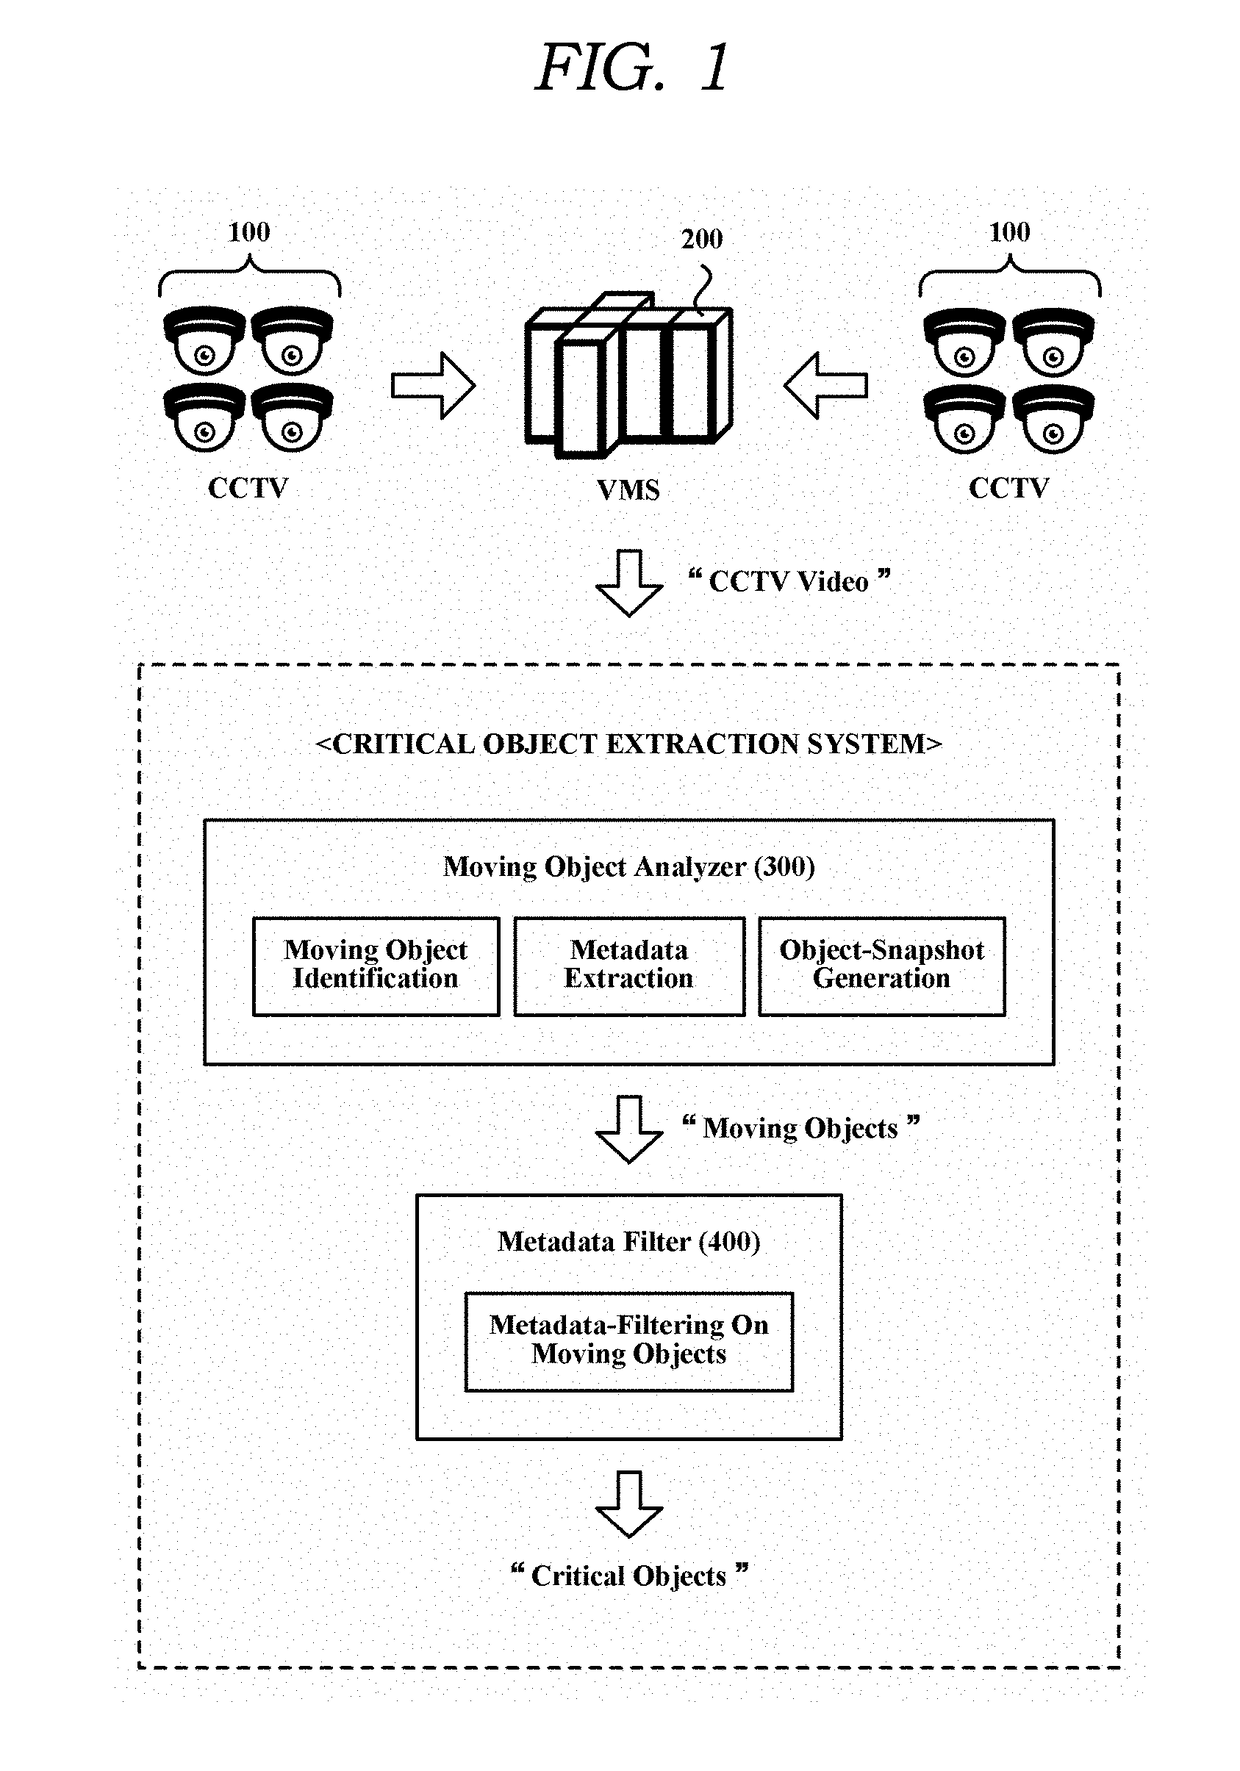 Method of detecting critical objects from CCTV video using metadata filtering